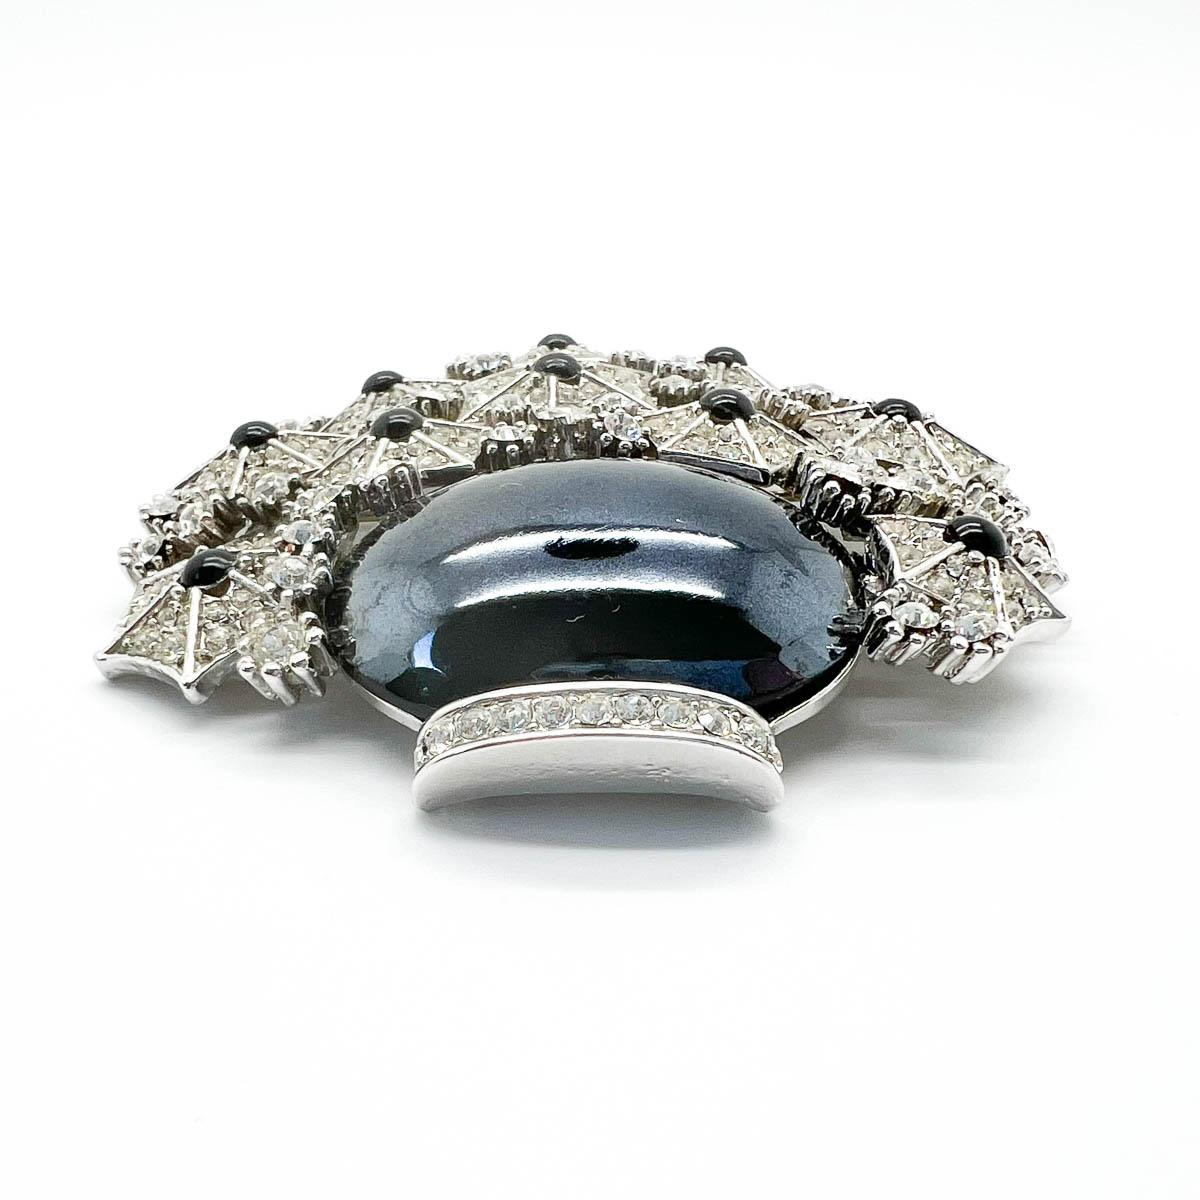 Vintage Cristobal Large Art Deco Style Giardinetti Brooch 1990s In Good Condition For Sale In Wilmslow, GB